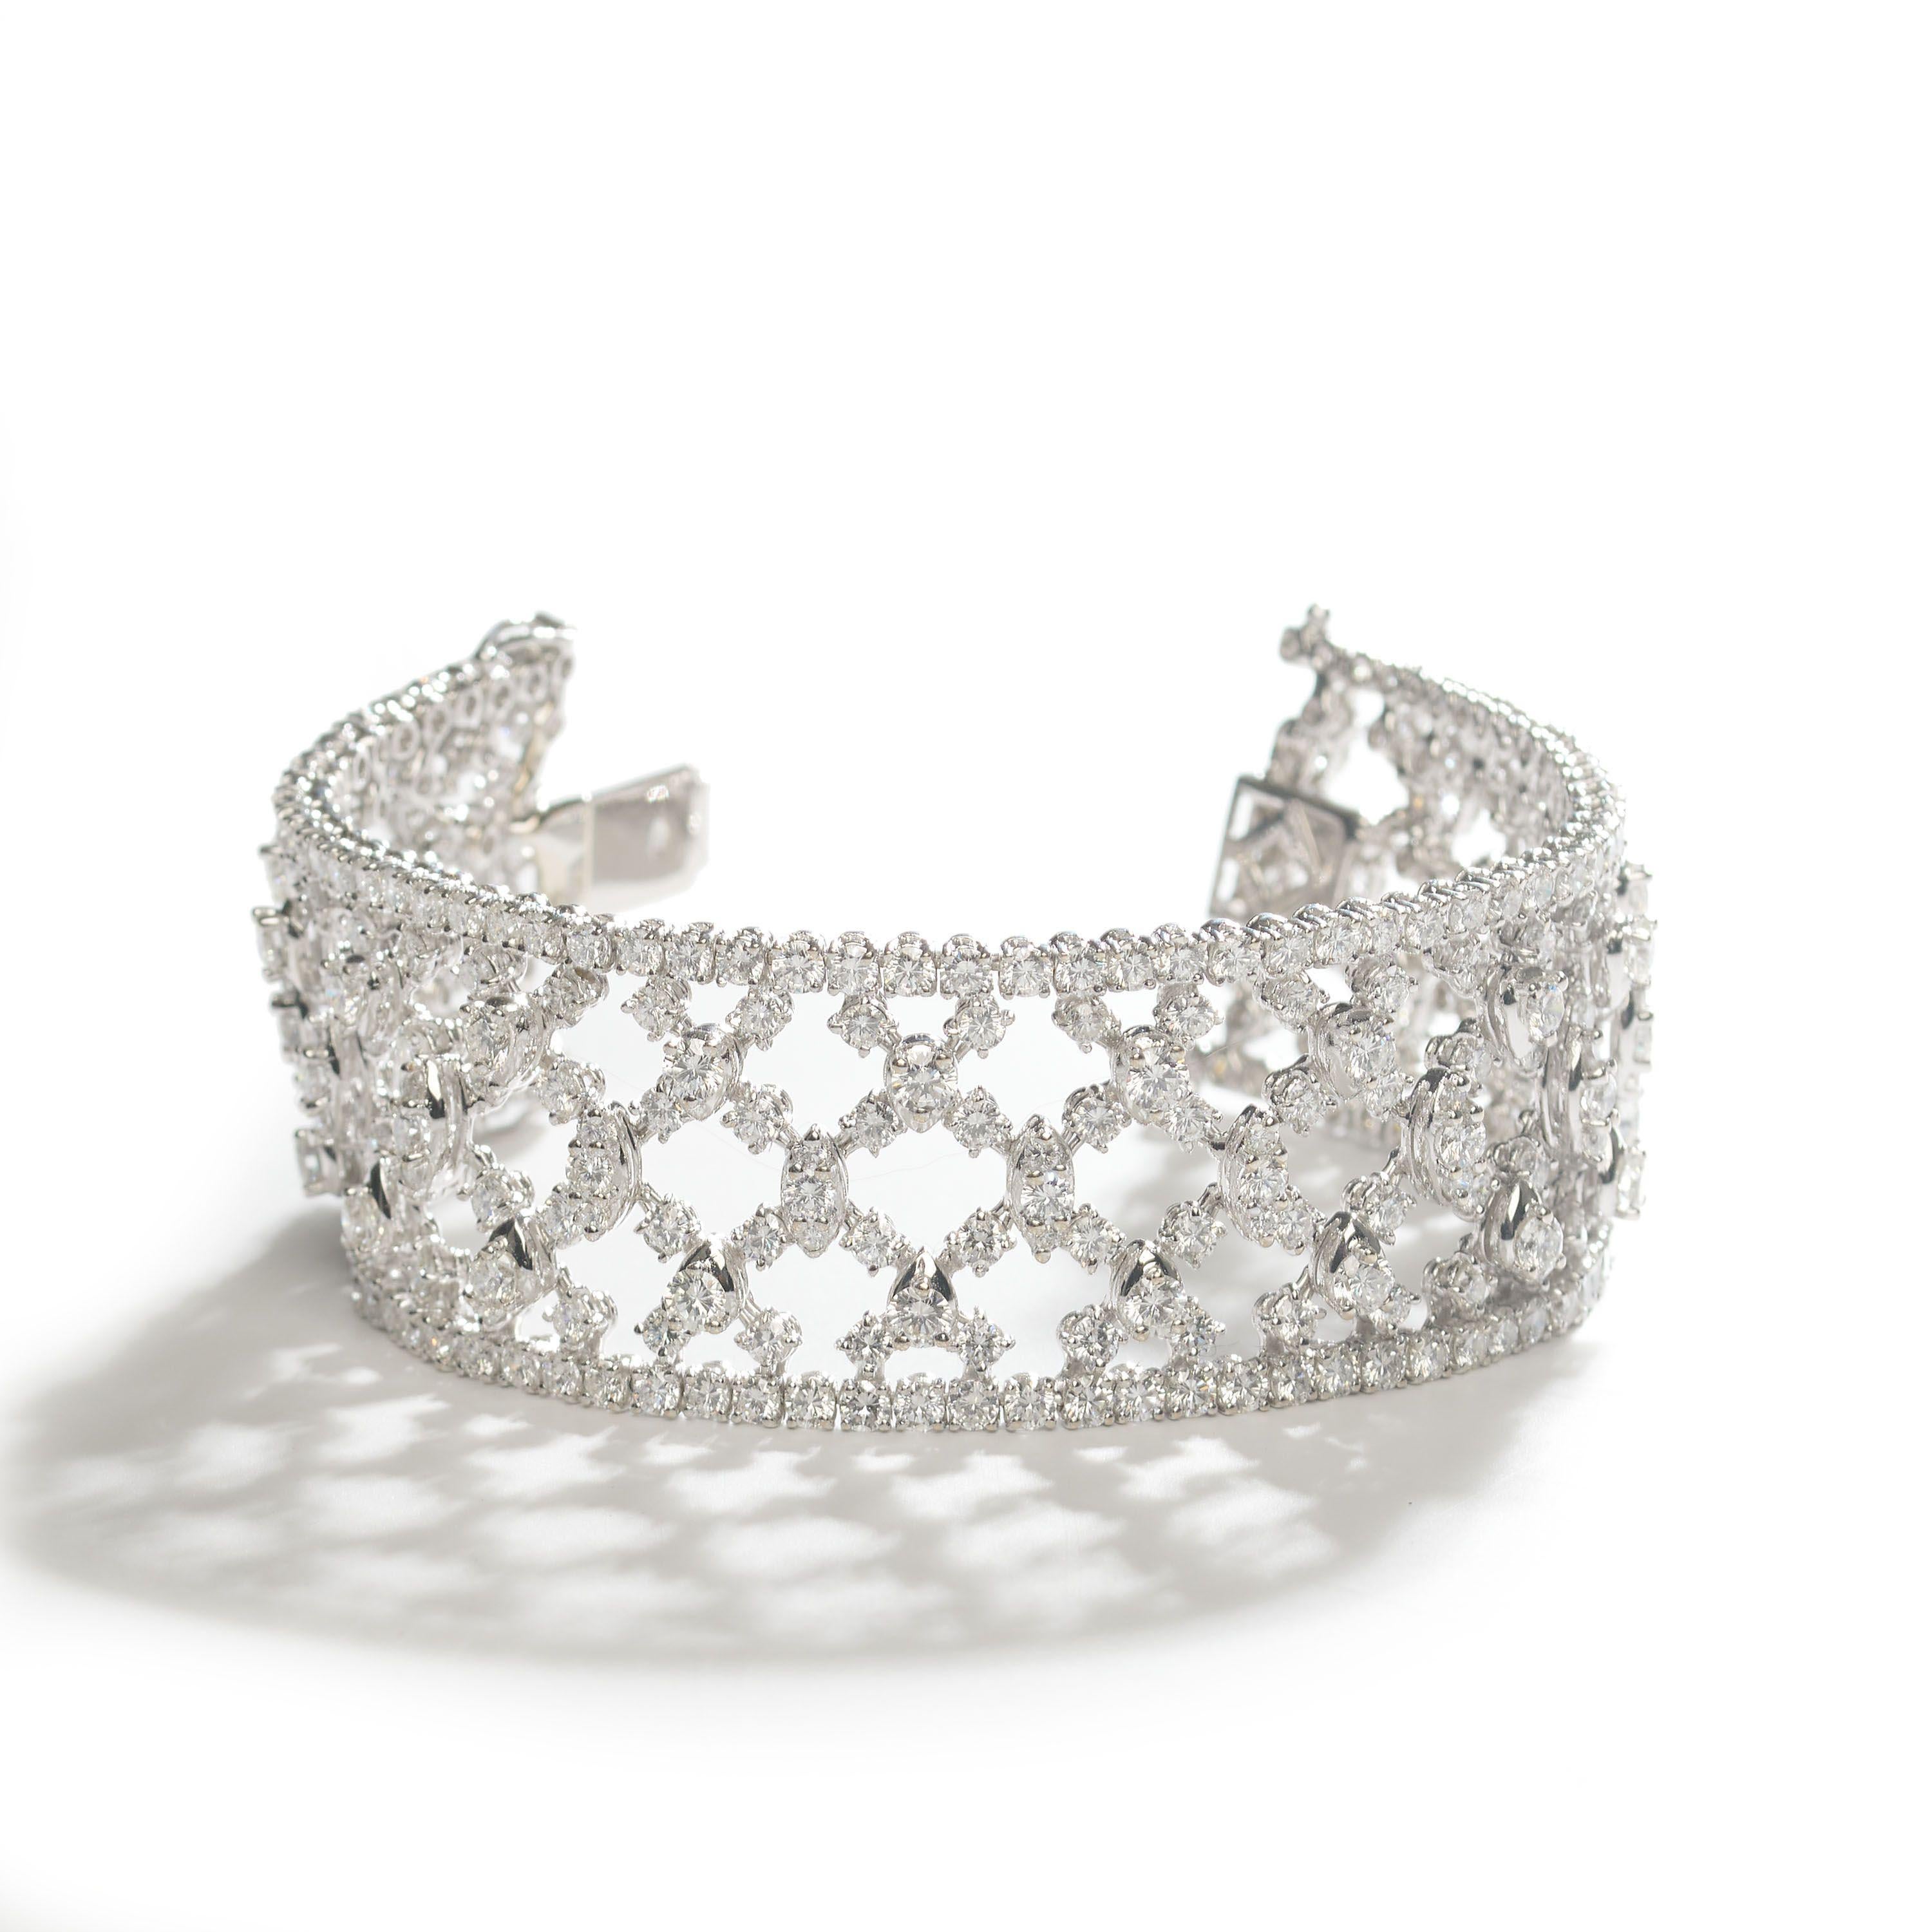 Wide Diamond And White Gold Trellis Bracelet, Circa 2000, 22.17 Carats In Good Condition For Sale In London, GB